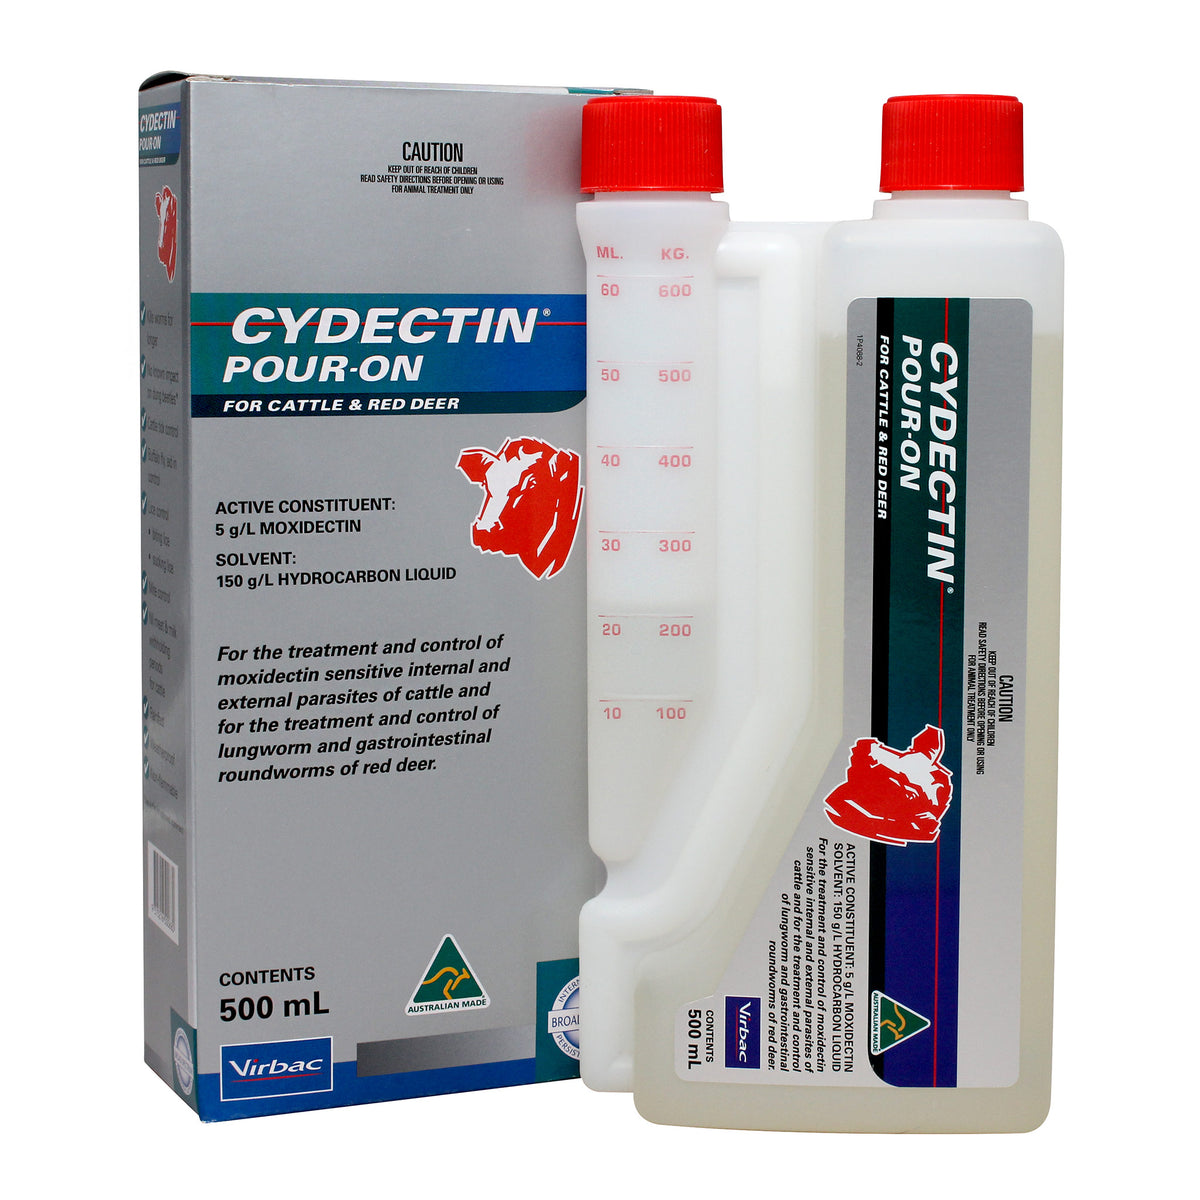 Cydectin Pour-On for Cattle